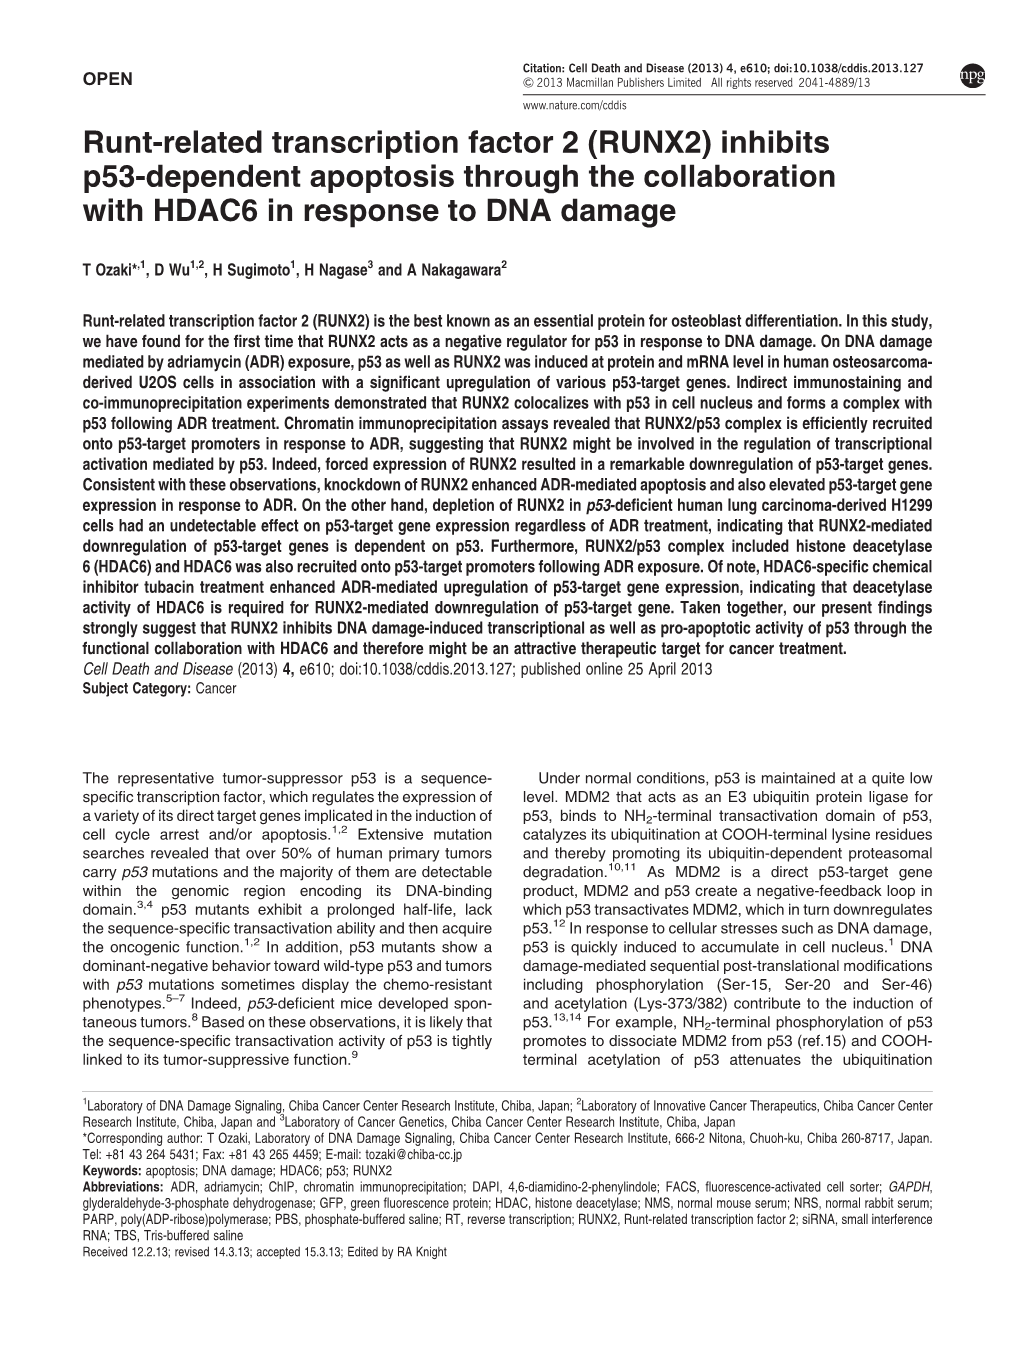 RUNX2) Inhibits P53-Dependent Apoptosis Through the Collaboration with HDAC6 in Response to DNA Damage